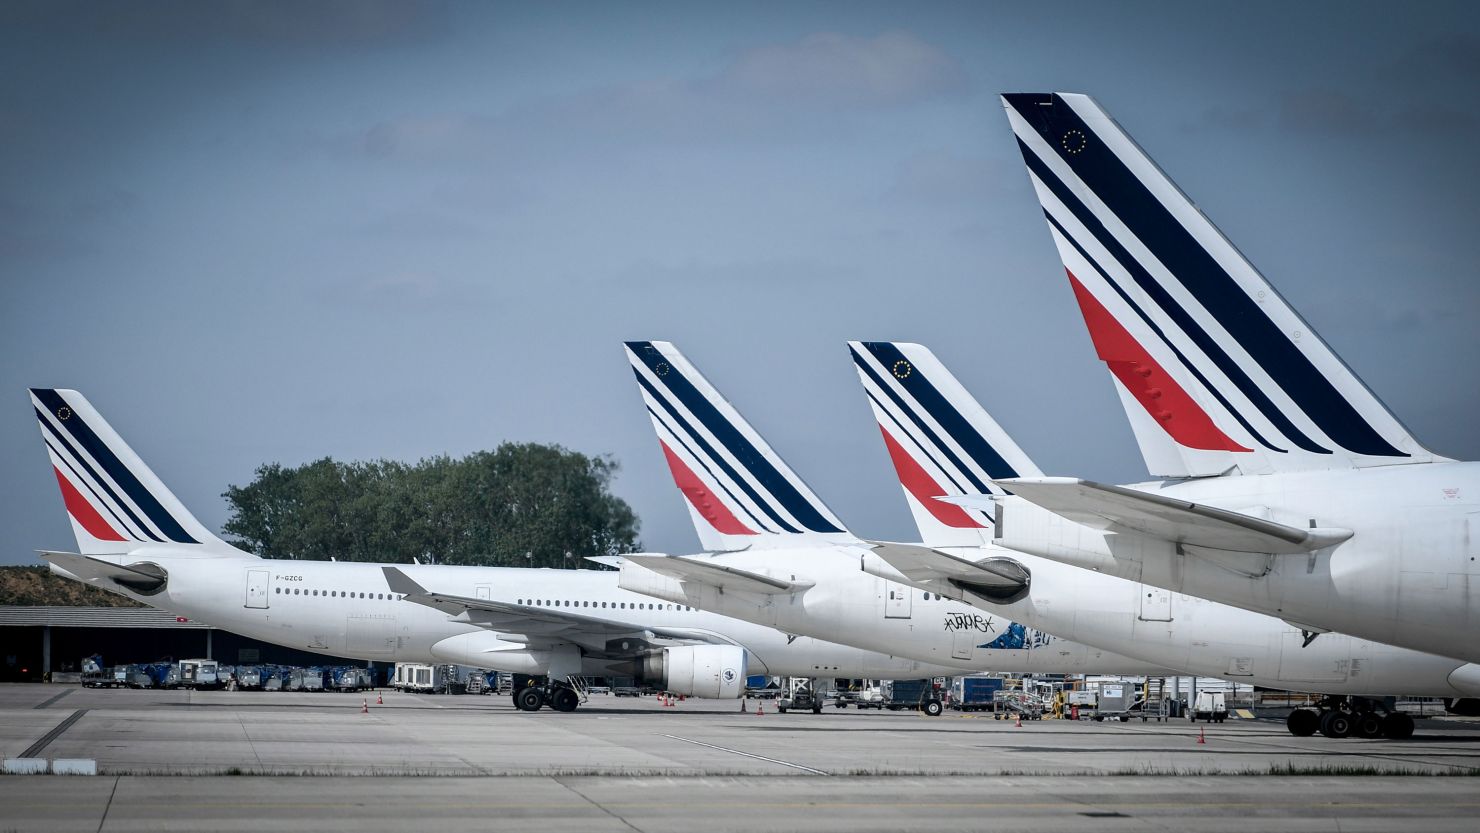 Air France confirmed that a body was found in the landing gear of a flight from Ivory Coast. 